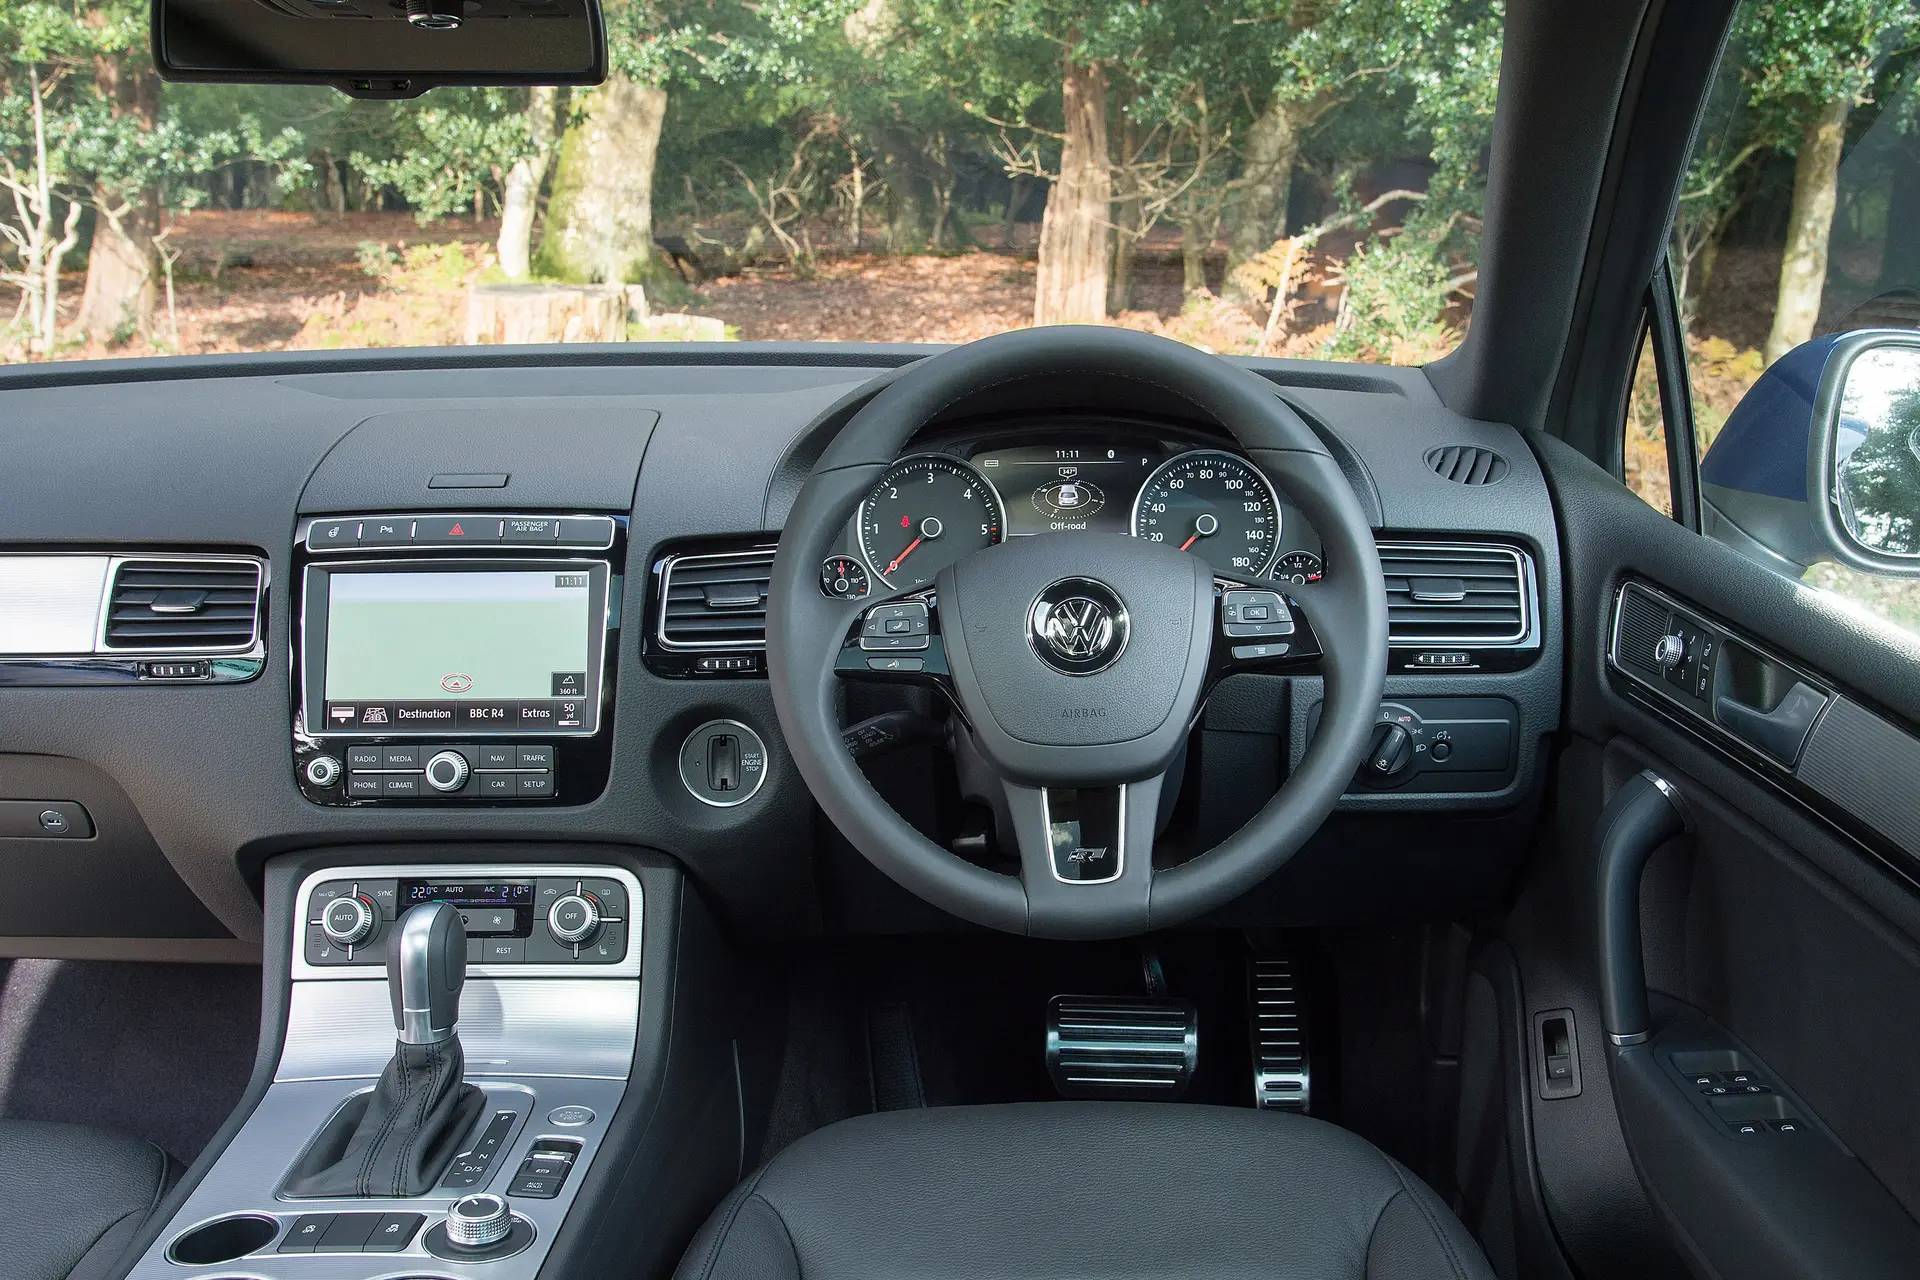  Volkswagen Touareg (2010-2018) Review: interior close up photo of the Volkswagen Touareg dashboard